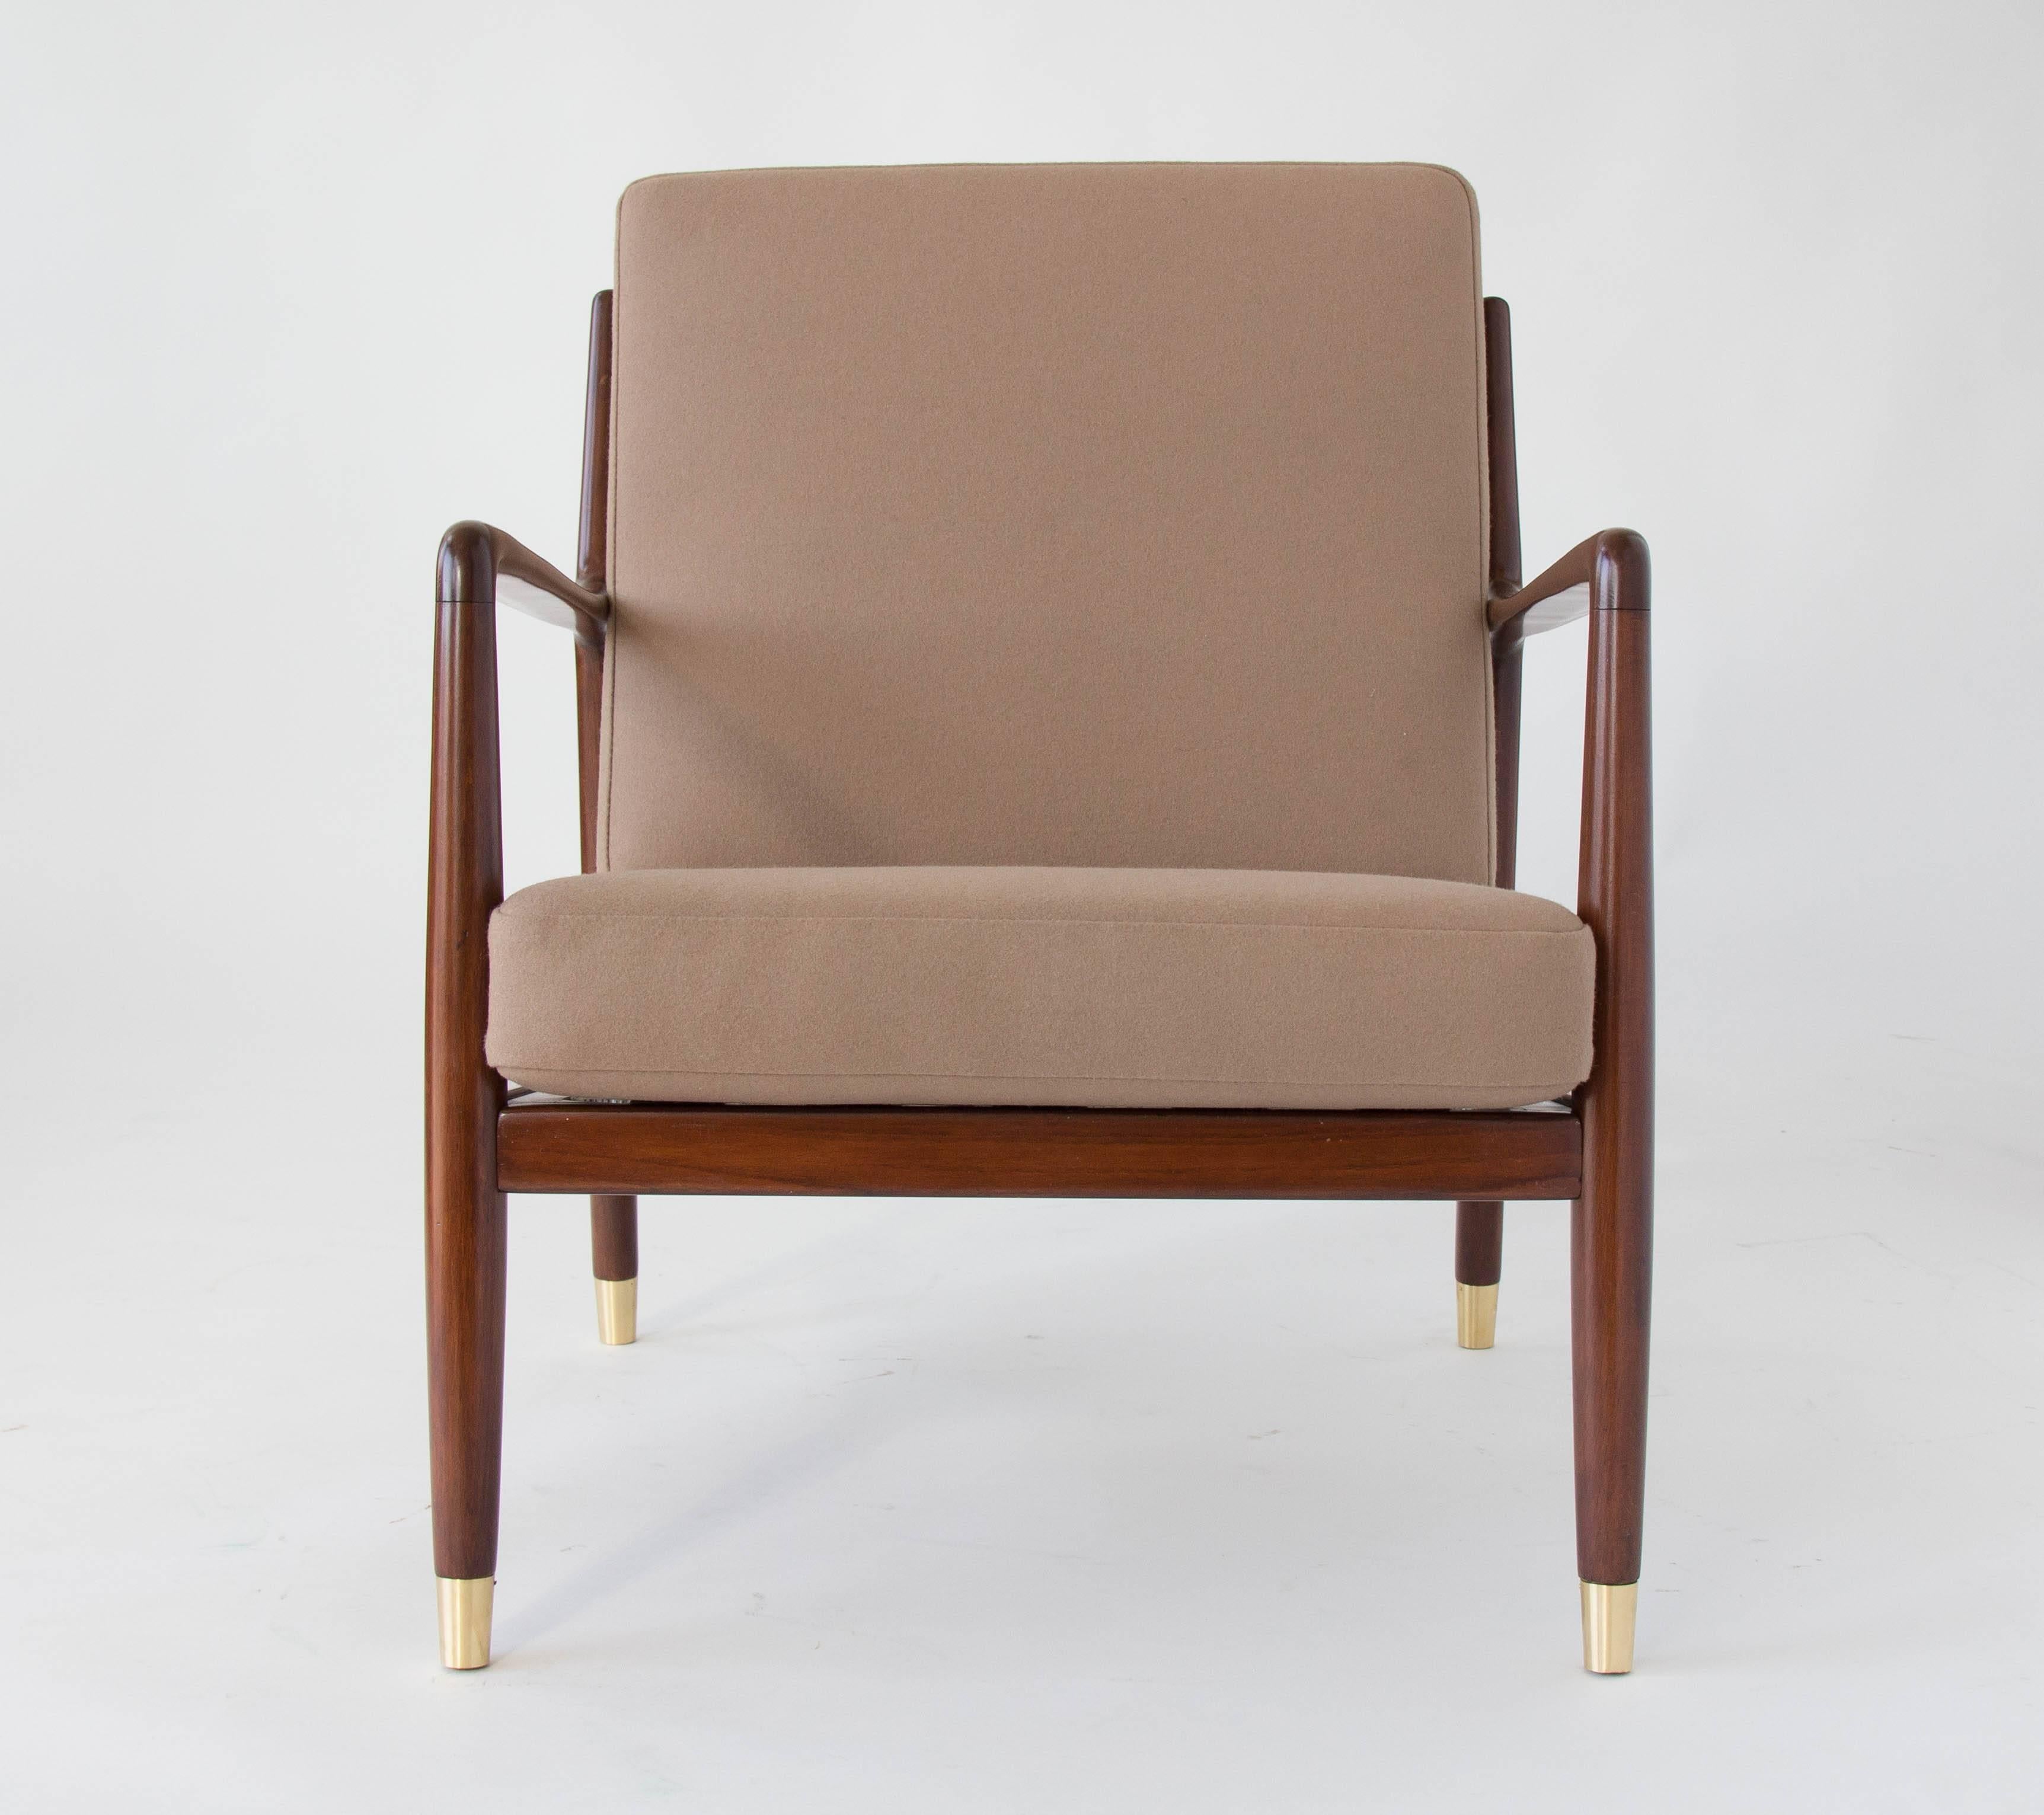 Pair of Lounge Chairs with Brass-Capped Legs by Folke Ohlsson for DUX (Poliert)